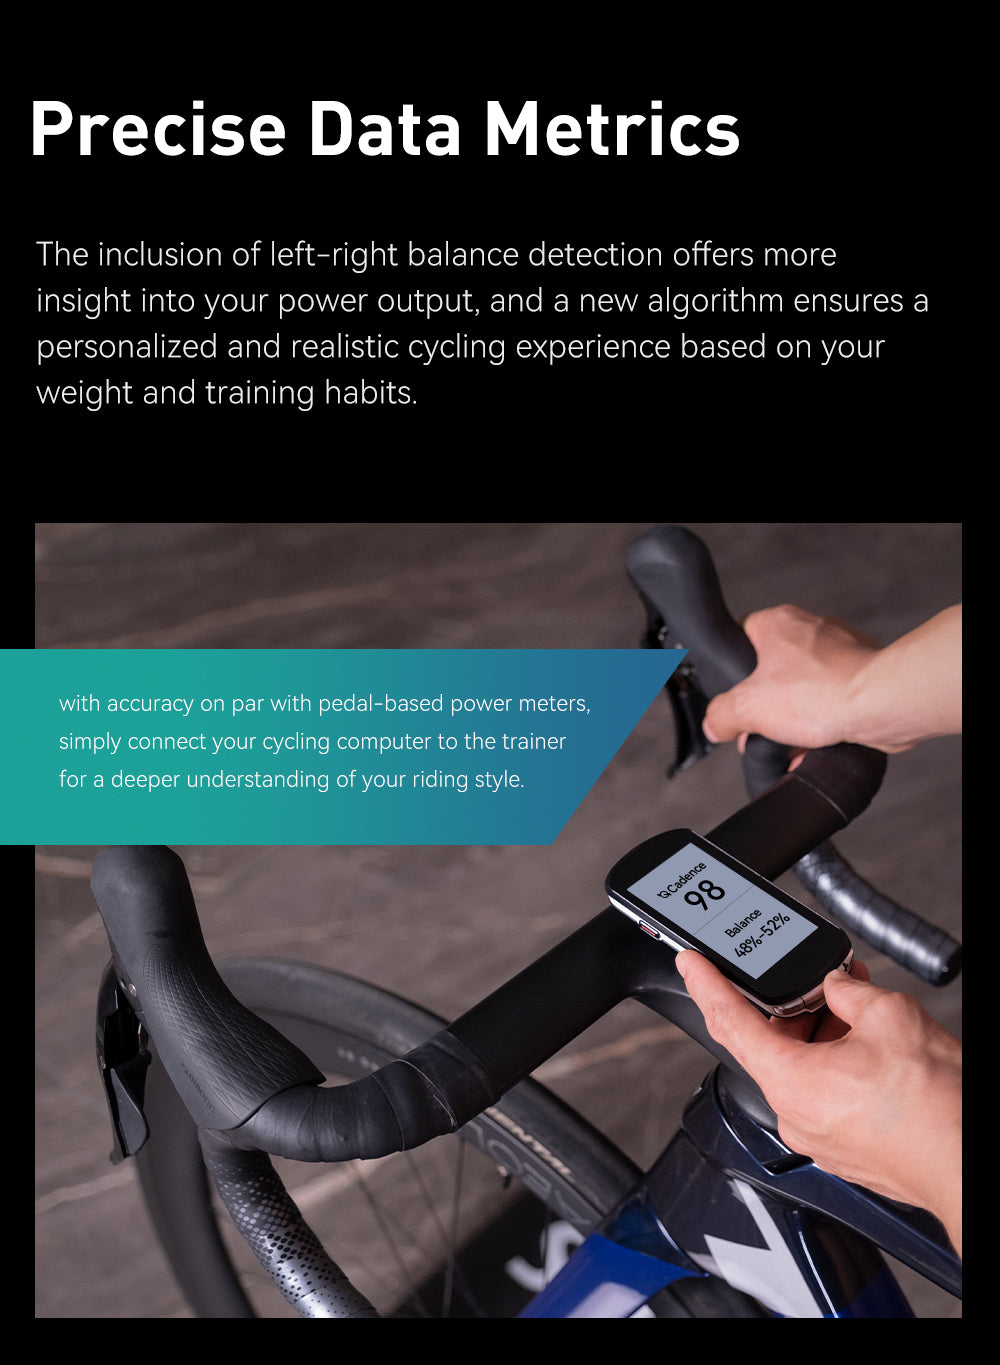 Precise Data Metrics The inclusion of left-right balance detection offers more insight into your power output, and a new algorithm ensures a personalized and realistic cycling experience based on your weight and training habits. *with accuracy on par with pedal-based power meters, simply connect your cycling computer to the trainer for a deeper understanding of your riding style.